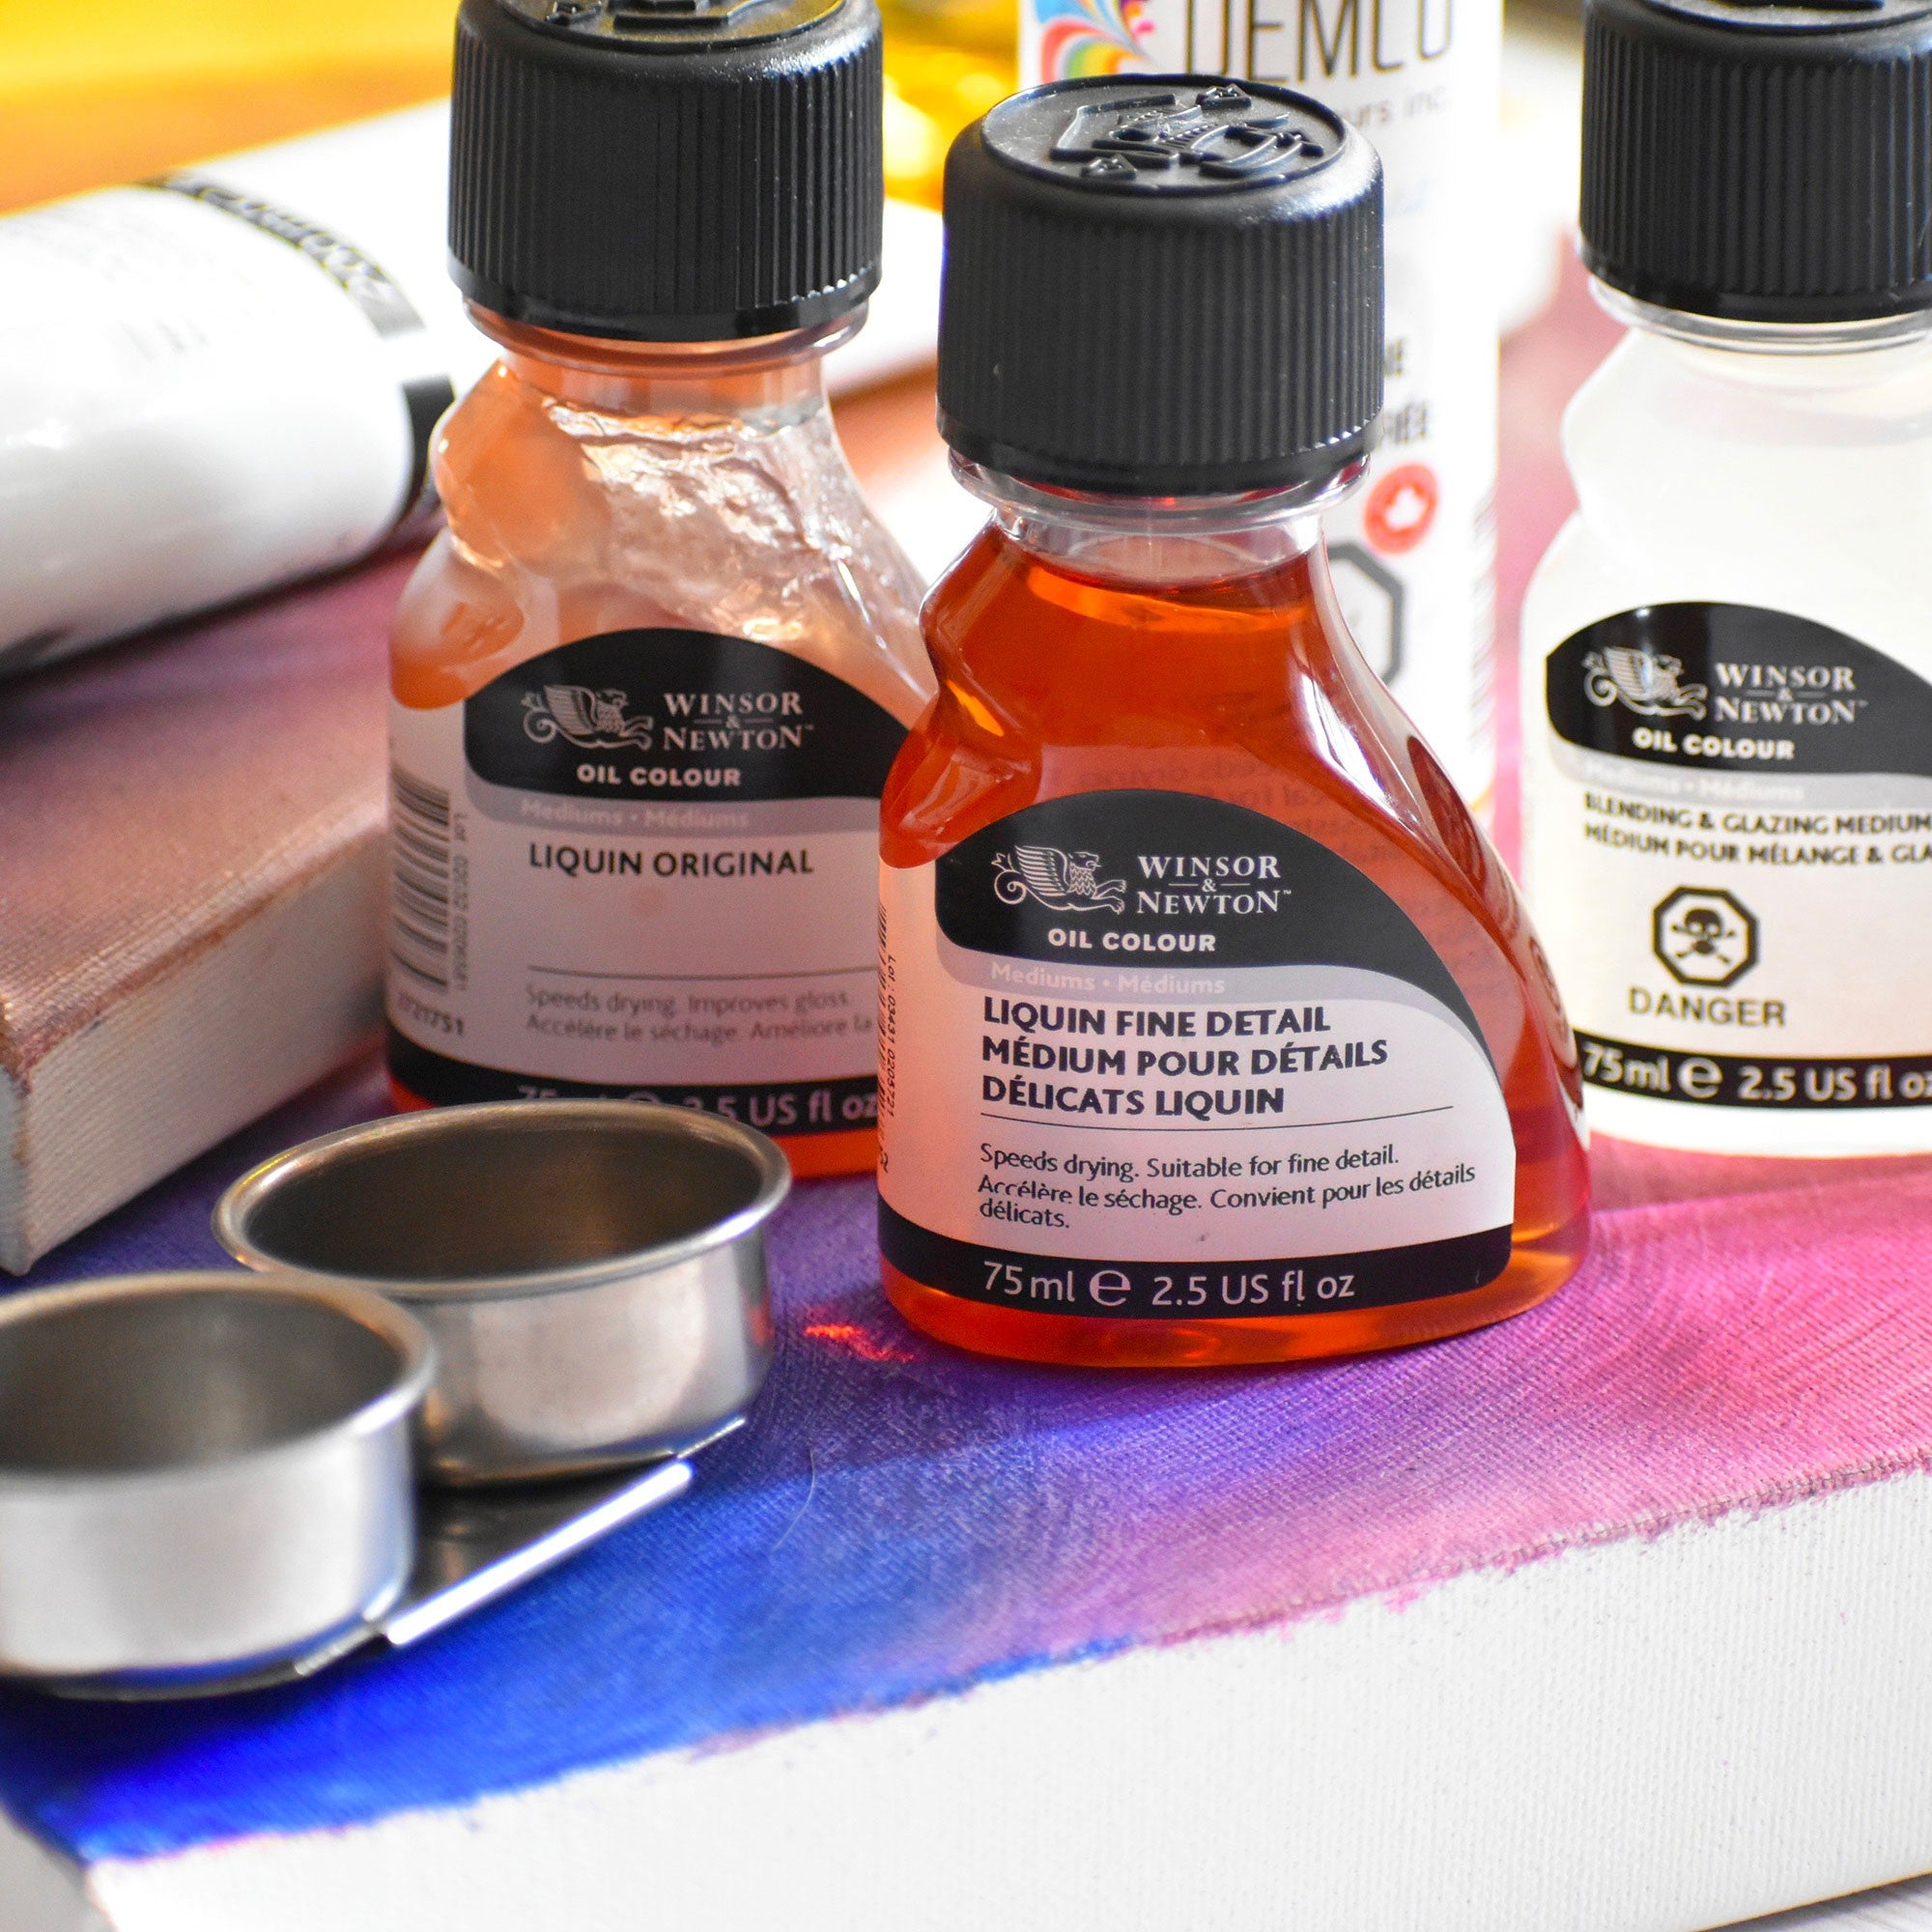 Oil Paints: What is Liquin and How is it Used?